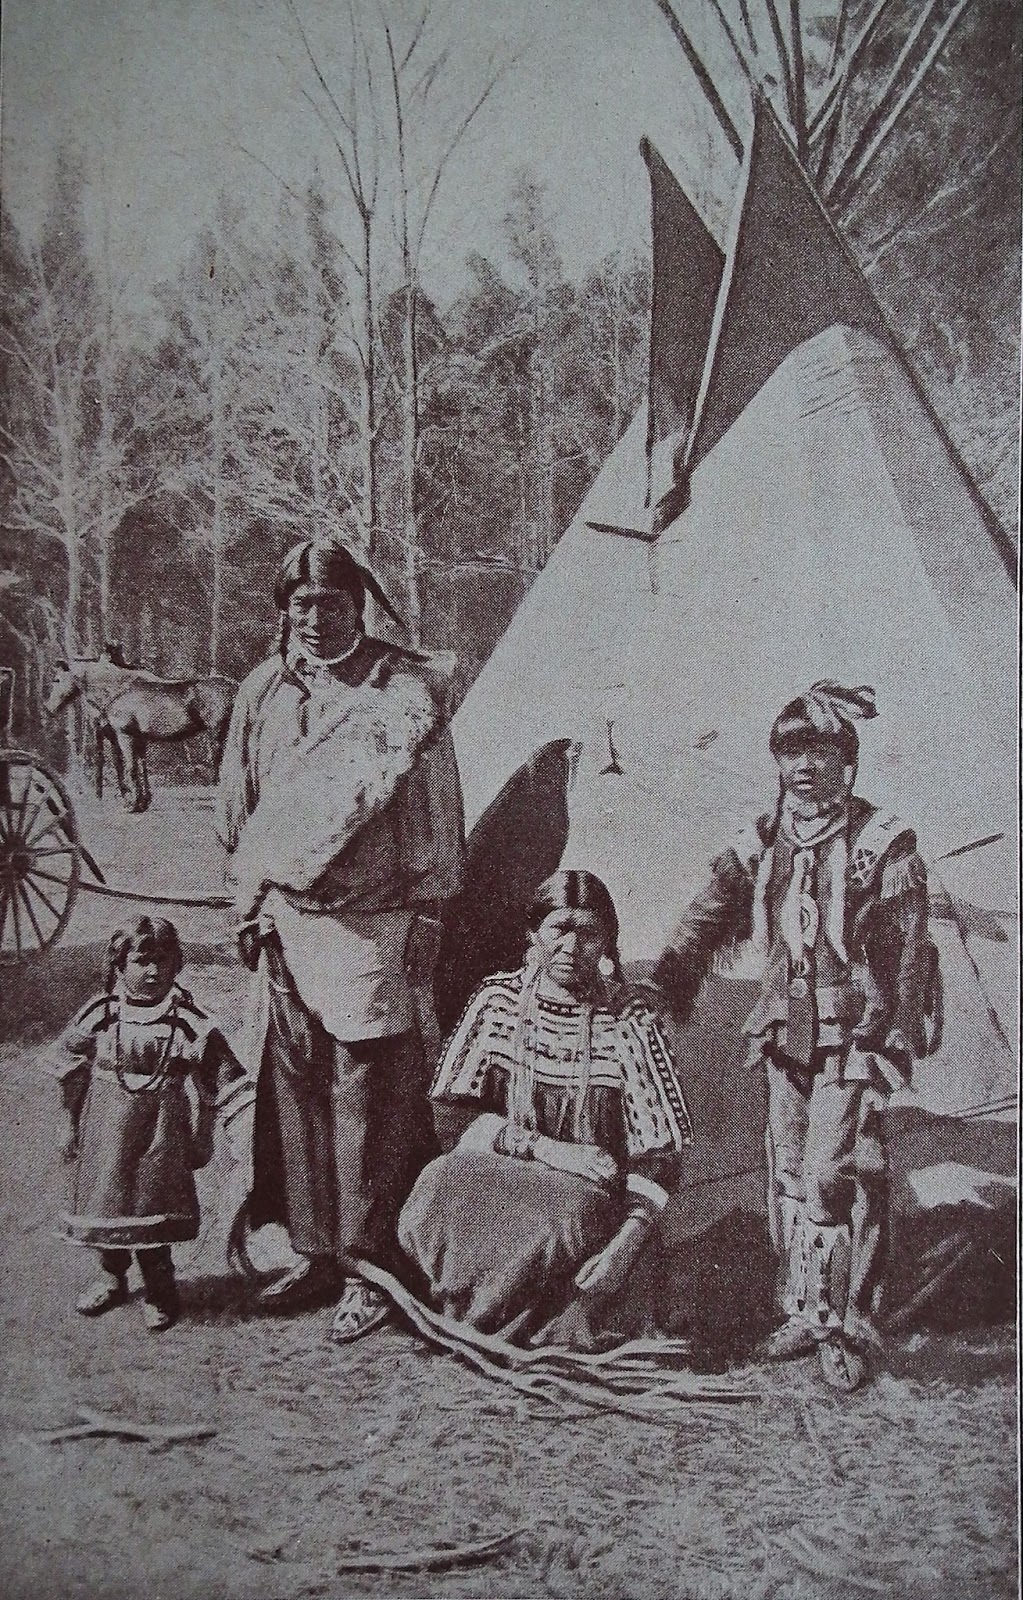 Eastern Canada Indians.